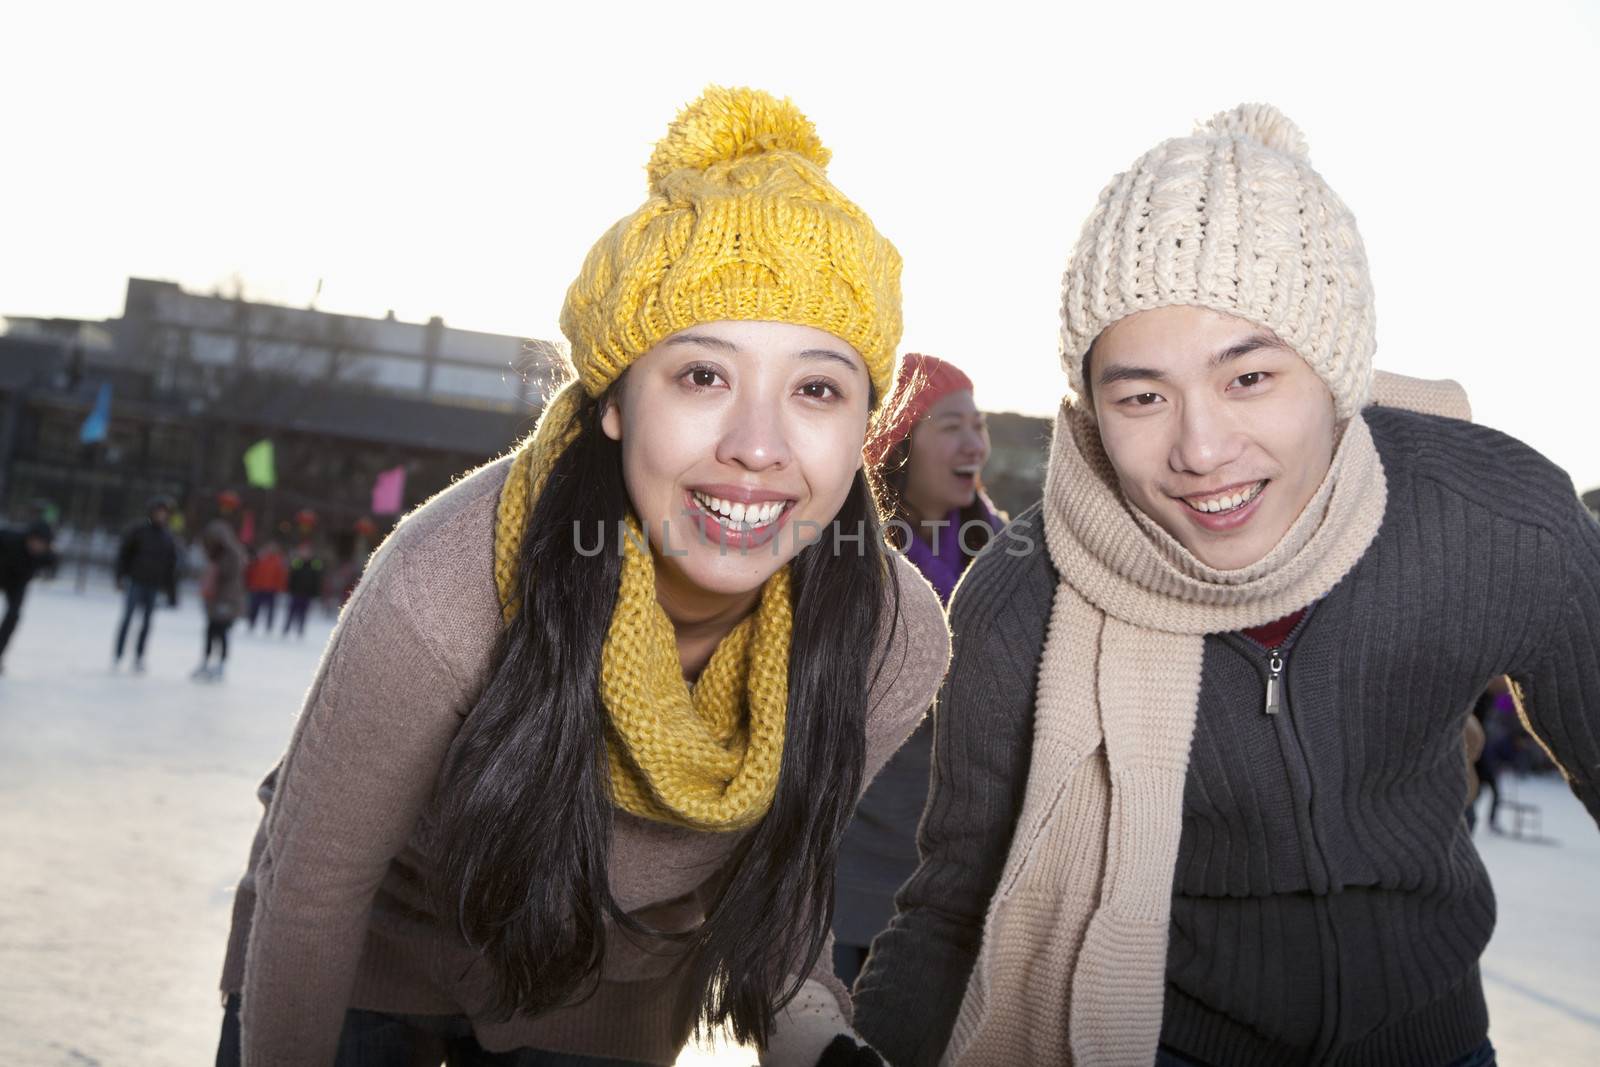 Young couple at ice rink